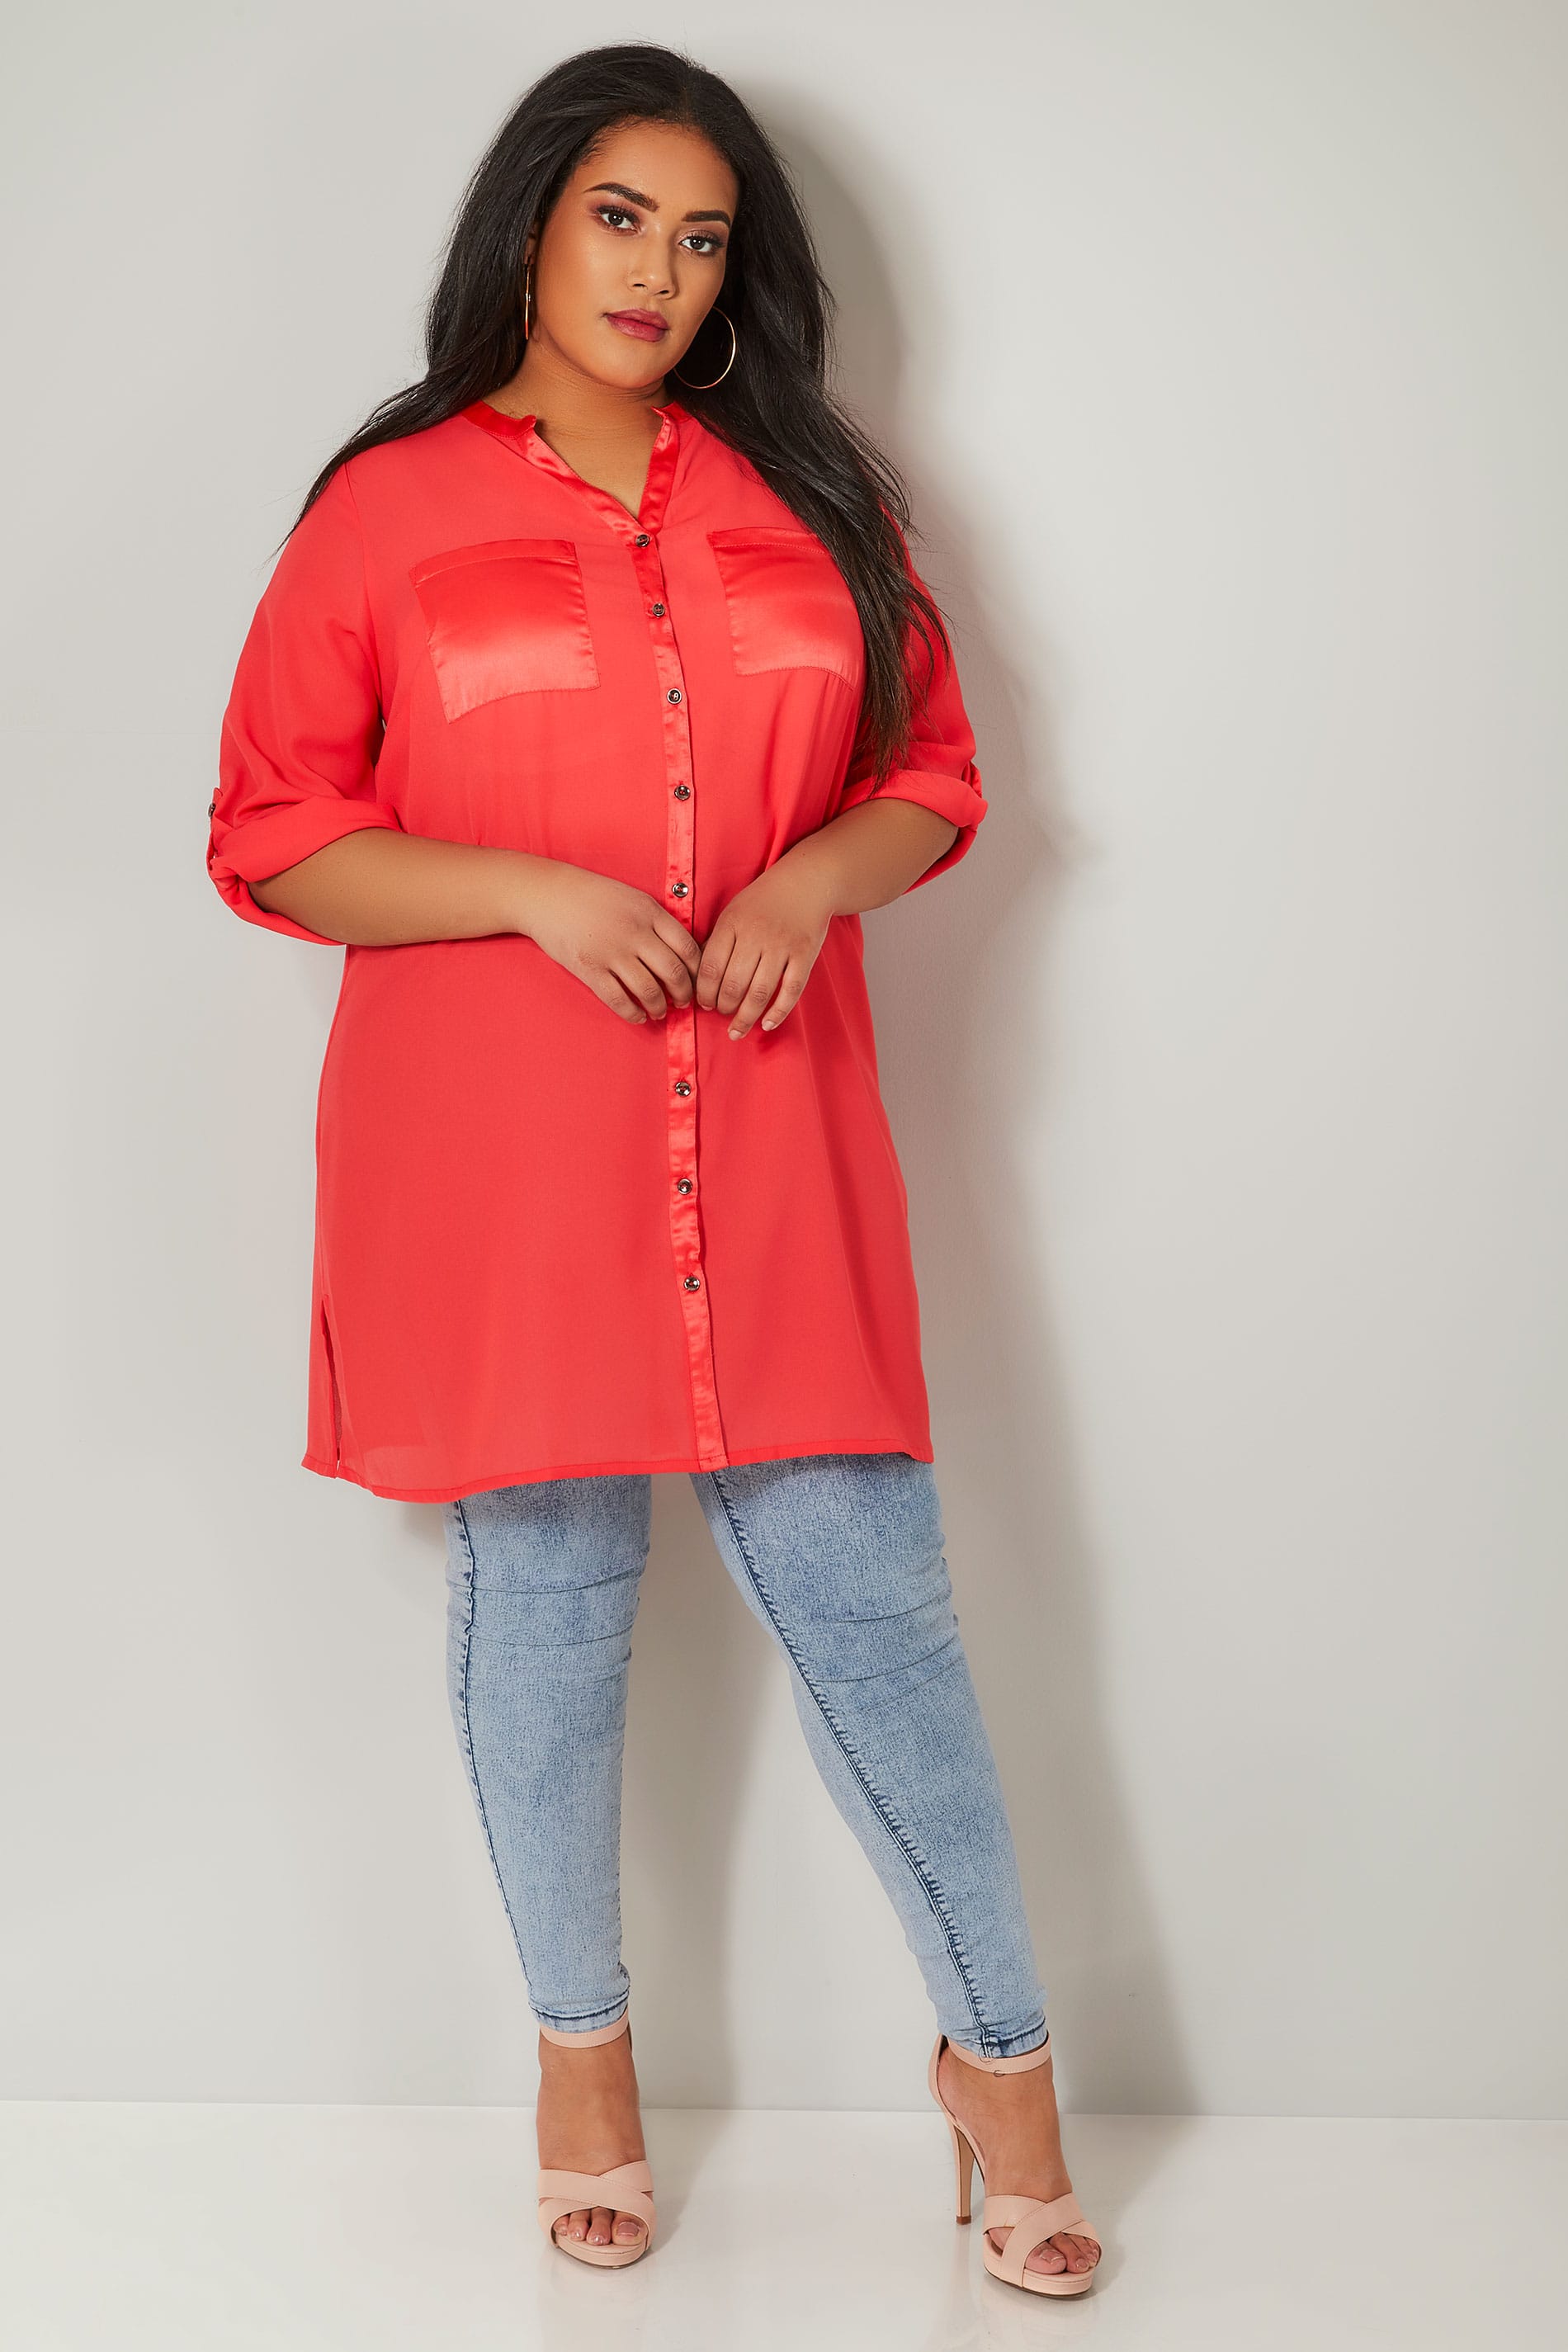 YOURS LONDON Coral Chiffon Blouse With Satin Trim, plus 